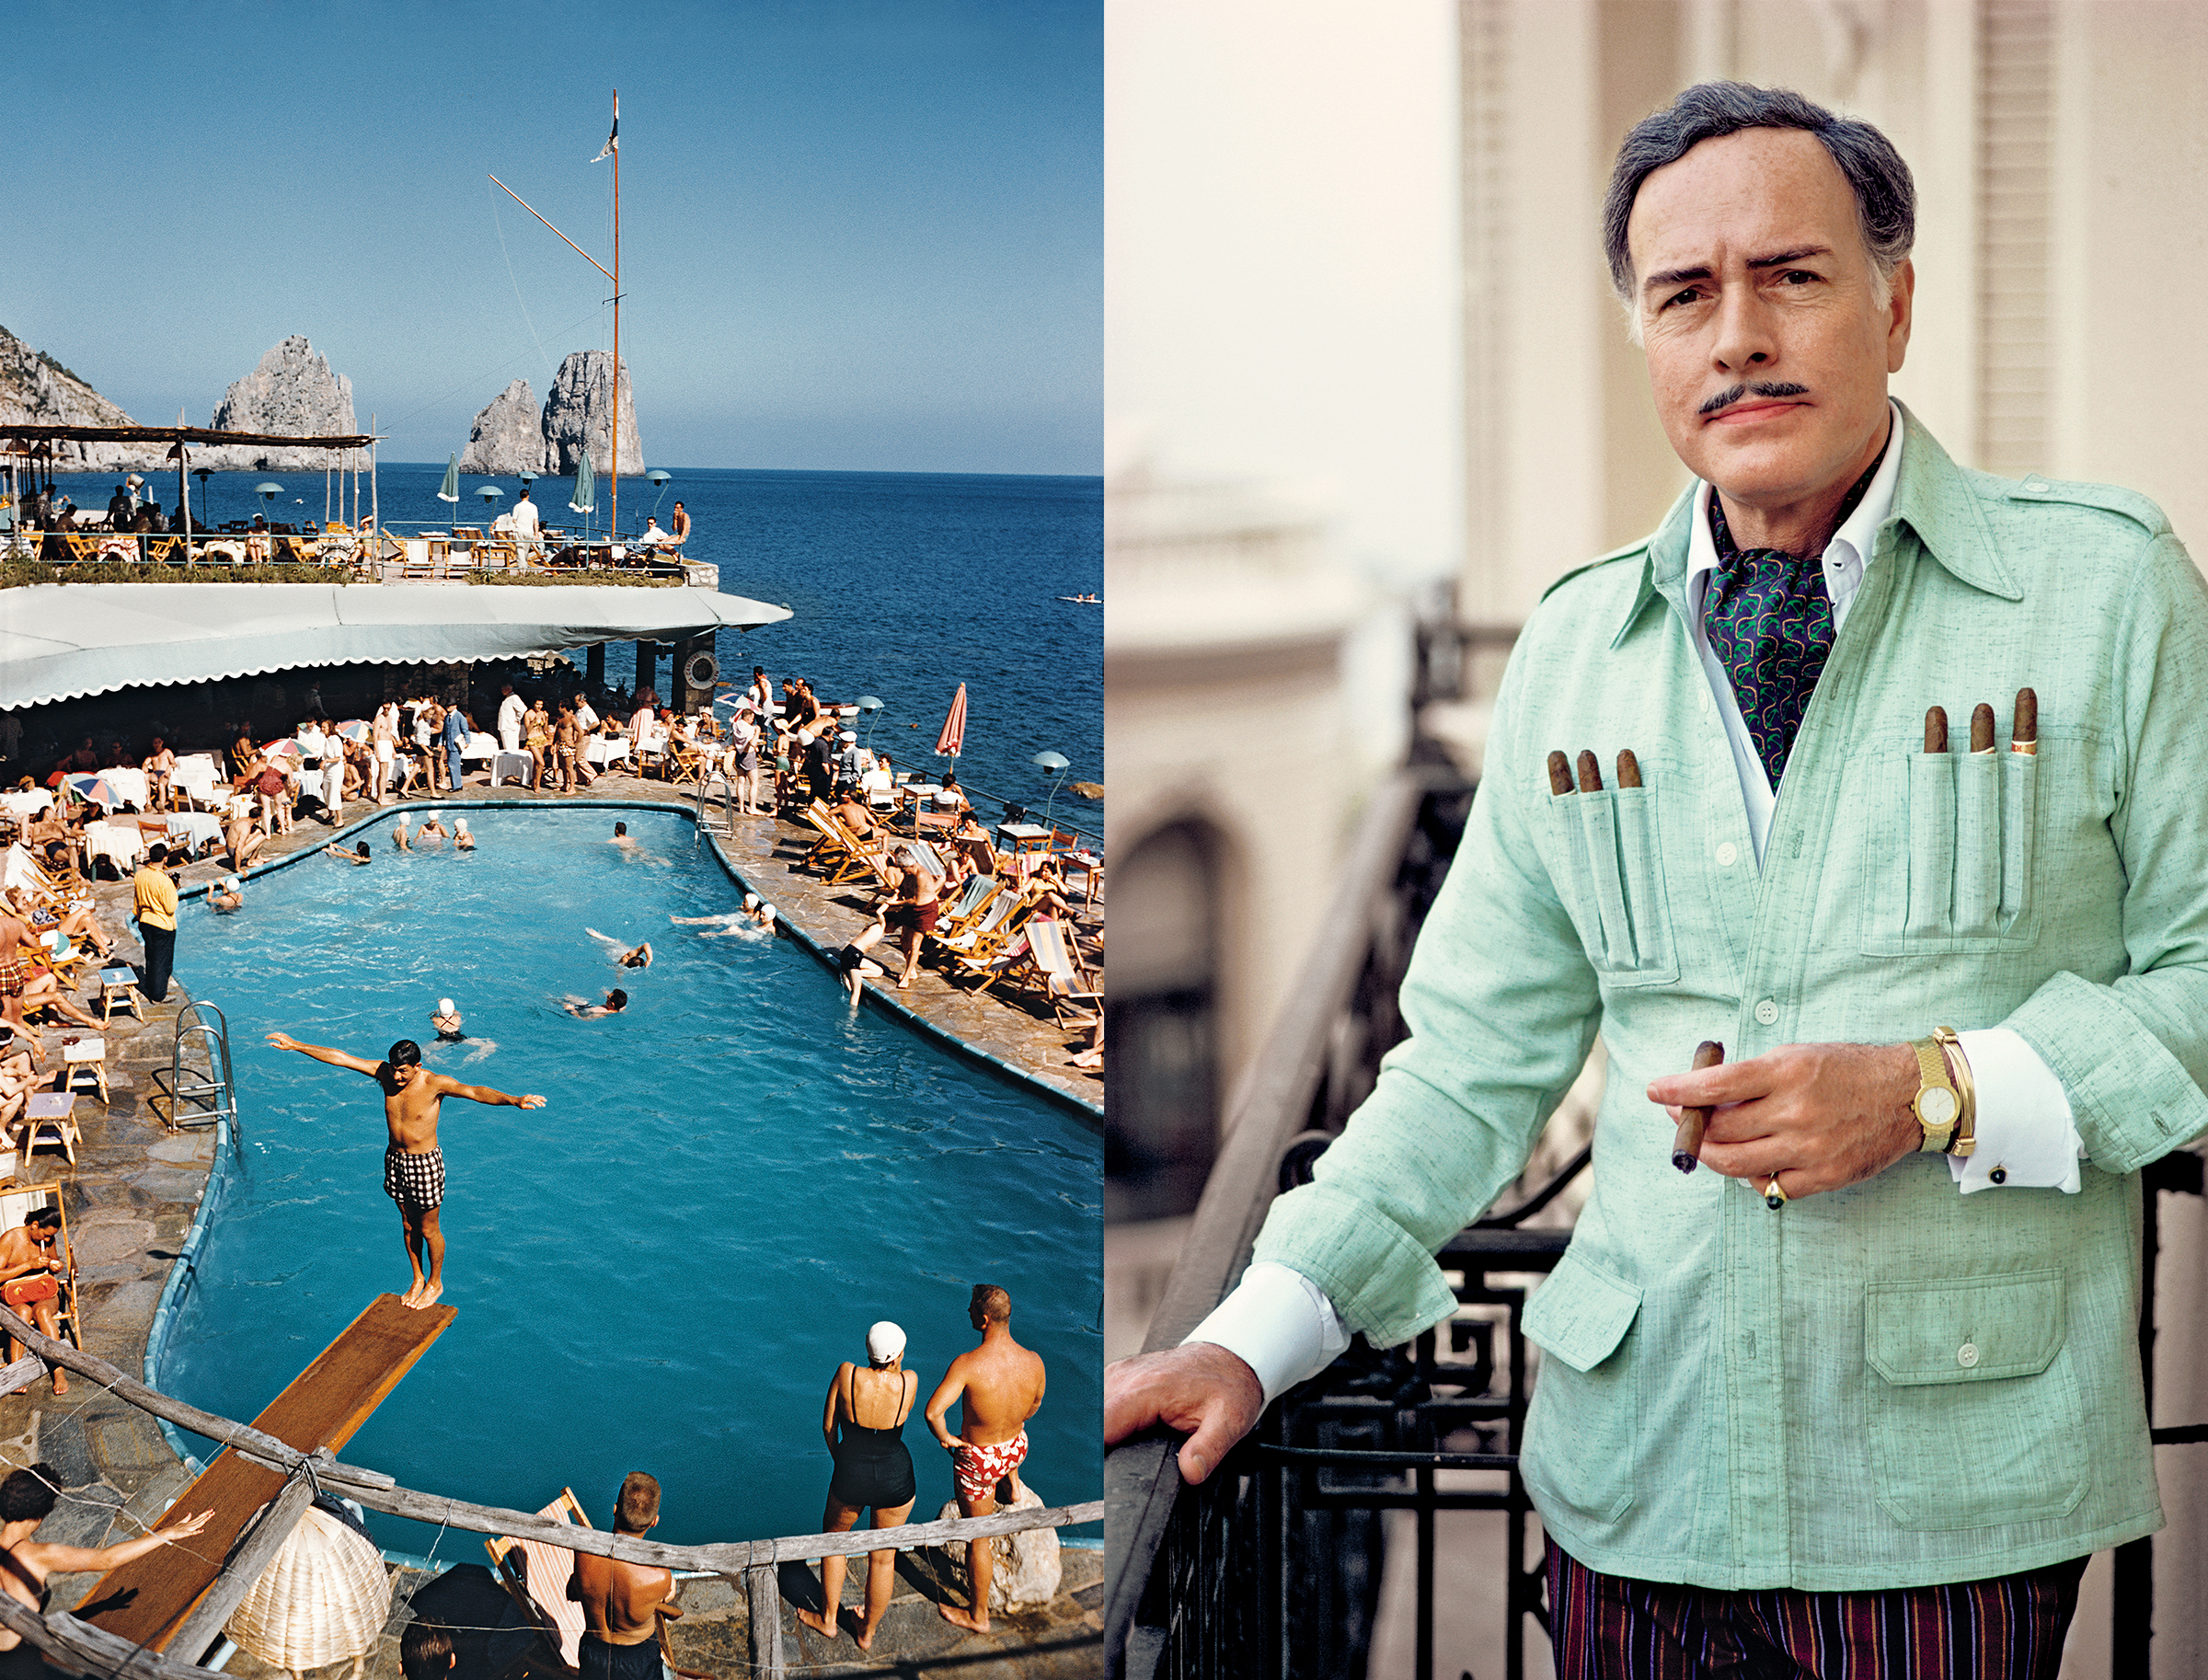 Two photos by Slim Aarons: one of a man jumping off a diving board at a party, and one of a wealthy man in a guayabera shirt smoking a cigar